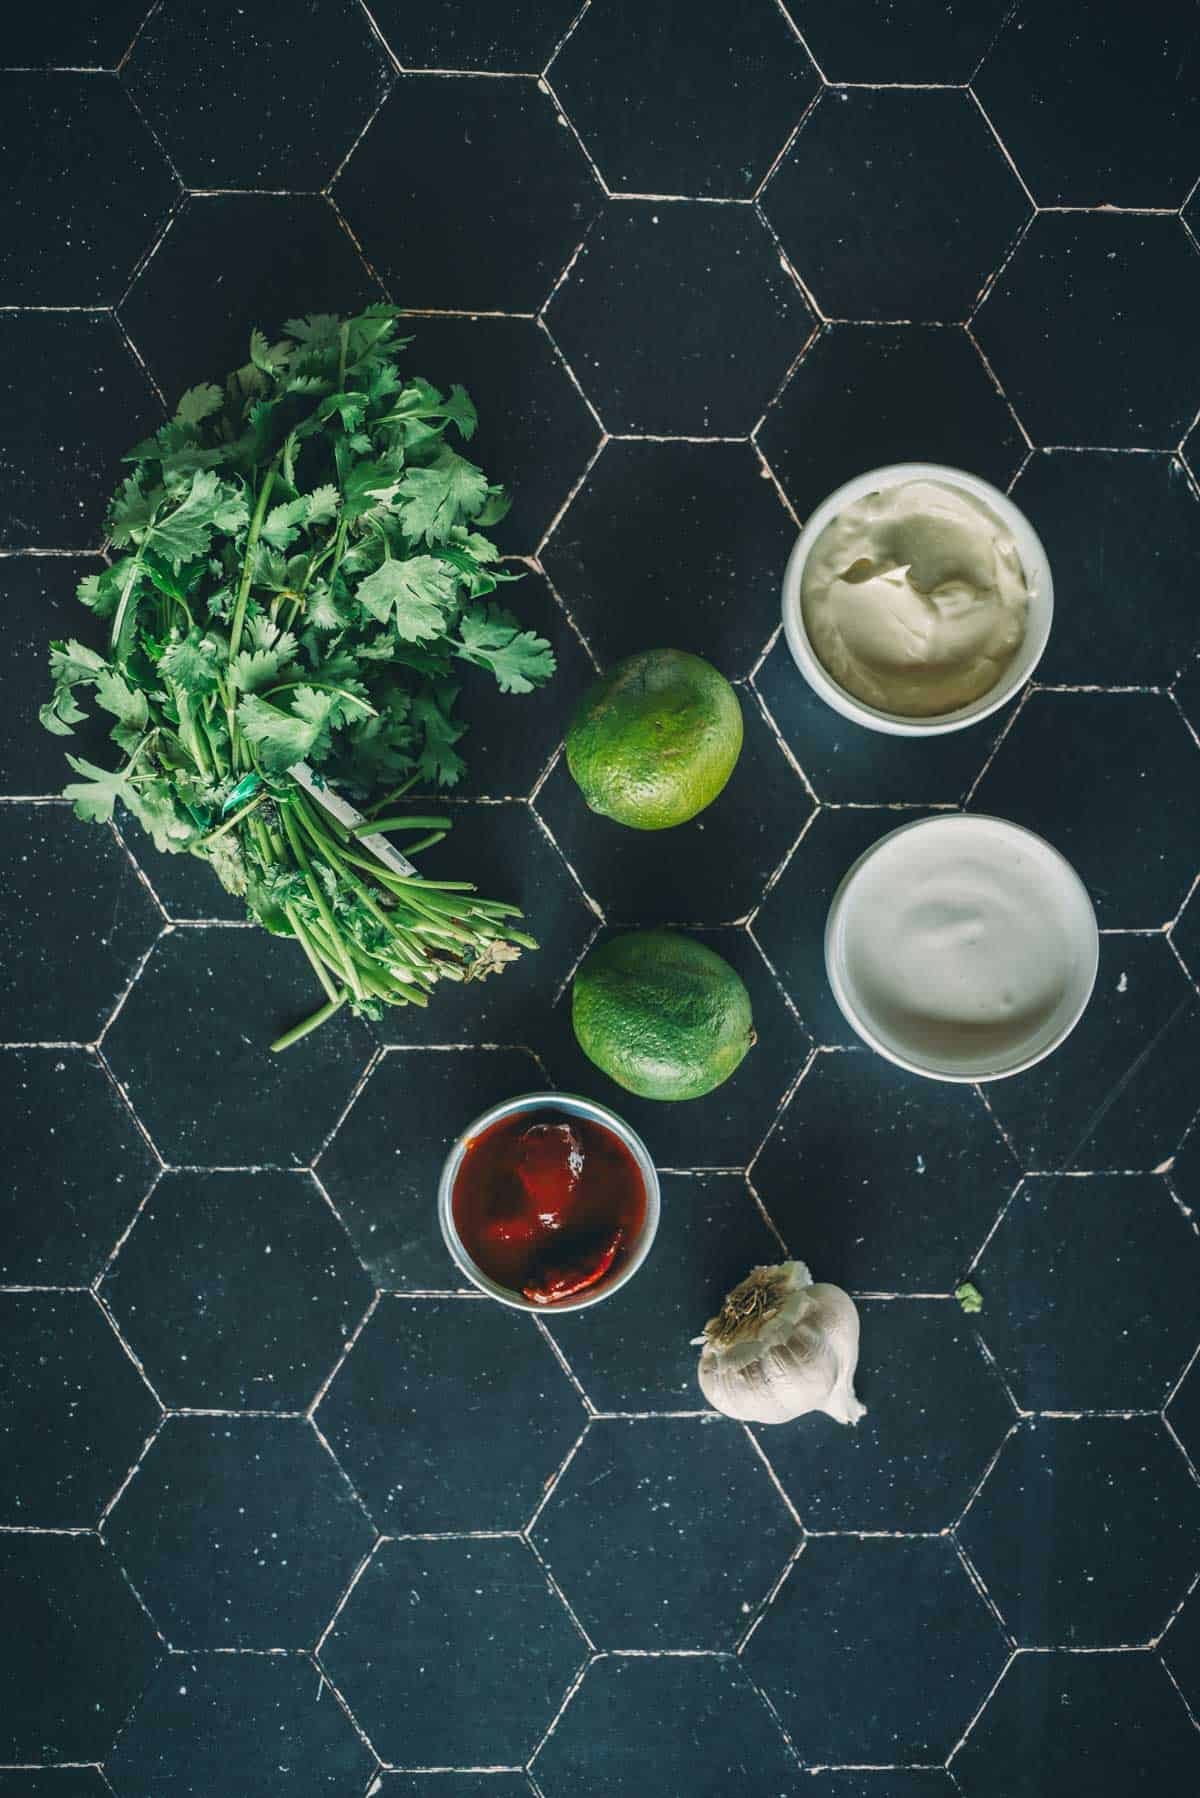 Cilantro, two limes, garlic, chipotle chiles in adobe, mayo, and crema are arranged on a black countertop.